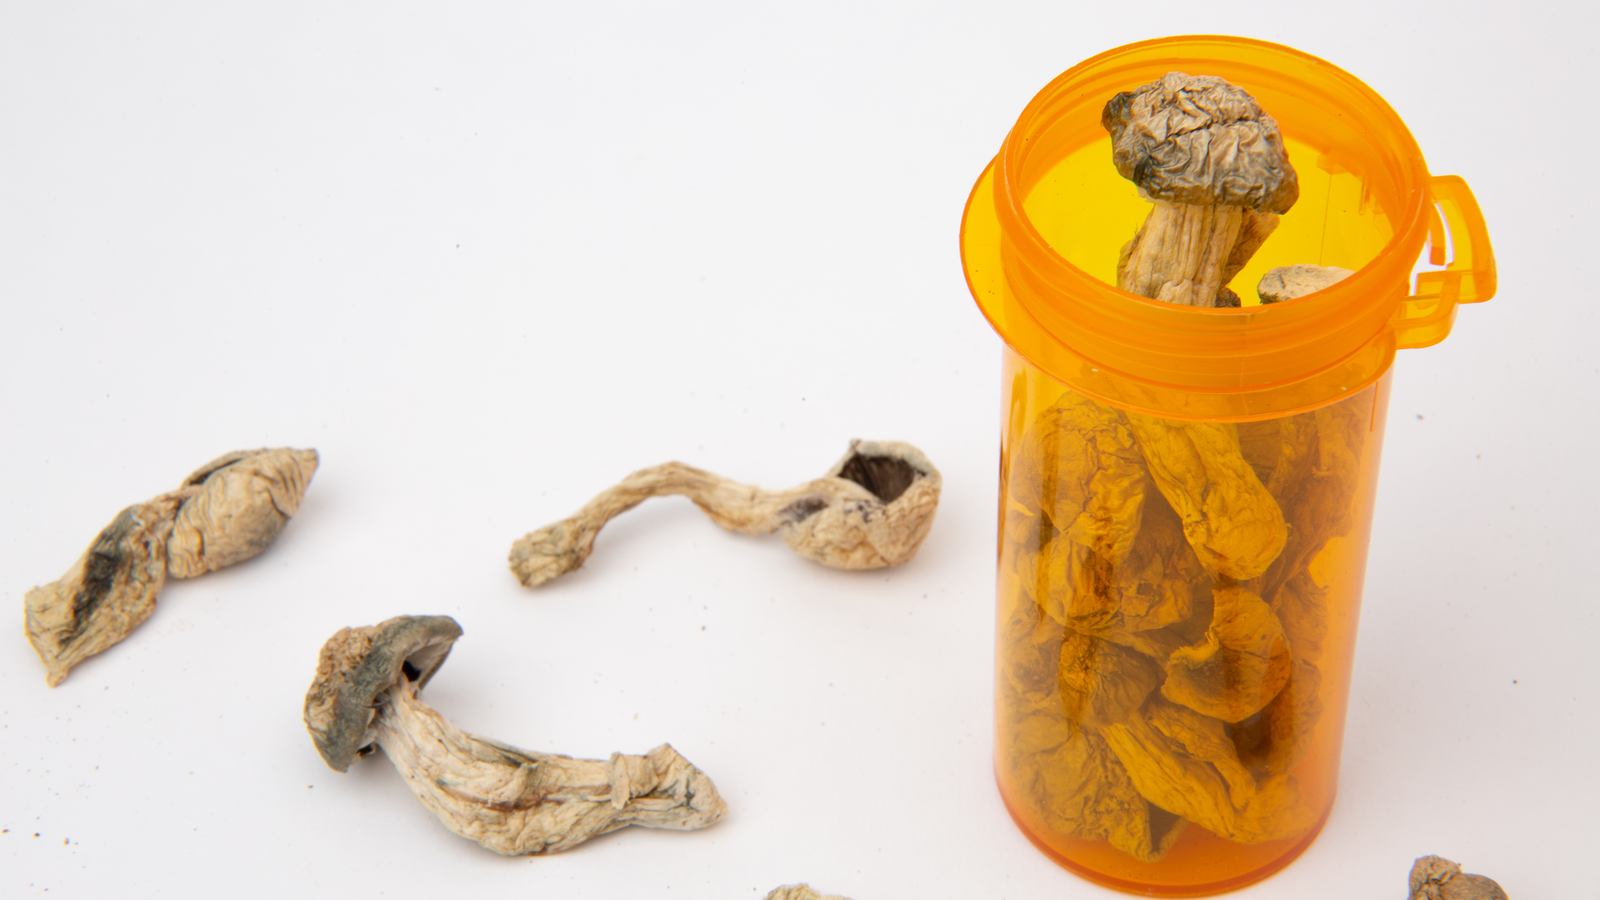 Dried psilocybe cubensis psilocybin magic mushrooms inside and around a plastic prescription medicine bottle with no lid isolated on white background, Mind Medicine is in the psychedelic medicine business representing MNMD Stock.